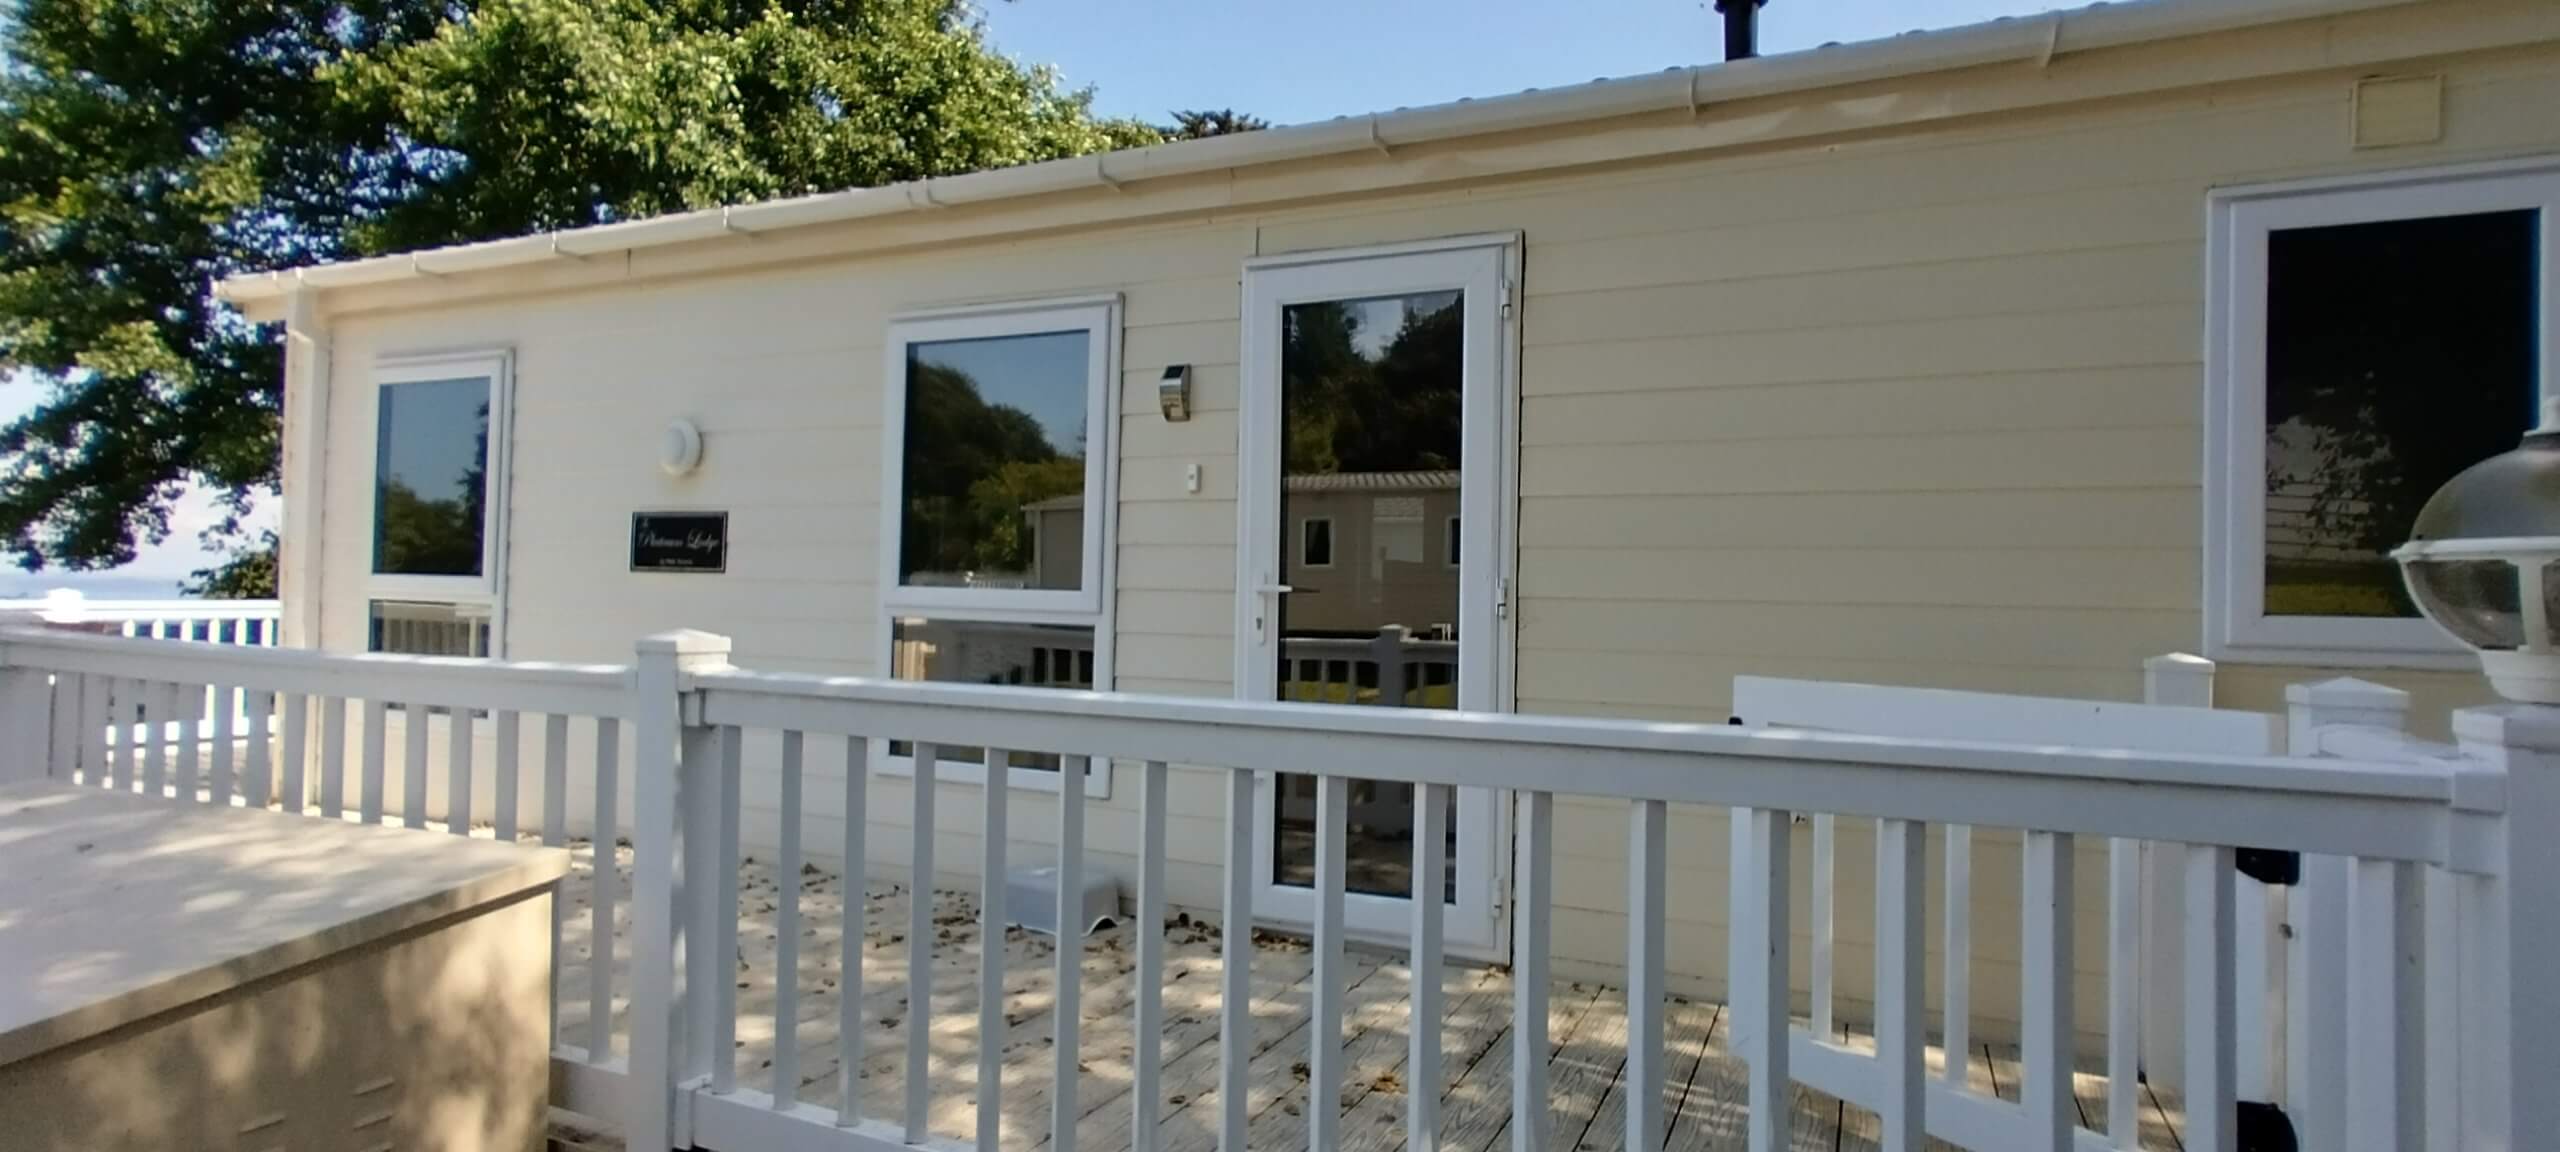 Grey 35 solar window film fitted to a lodge at Parkdean, Bideford Bay, North Devon by Tinting Express